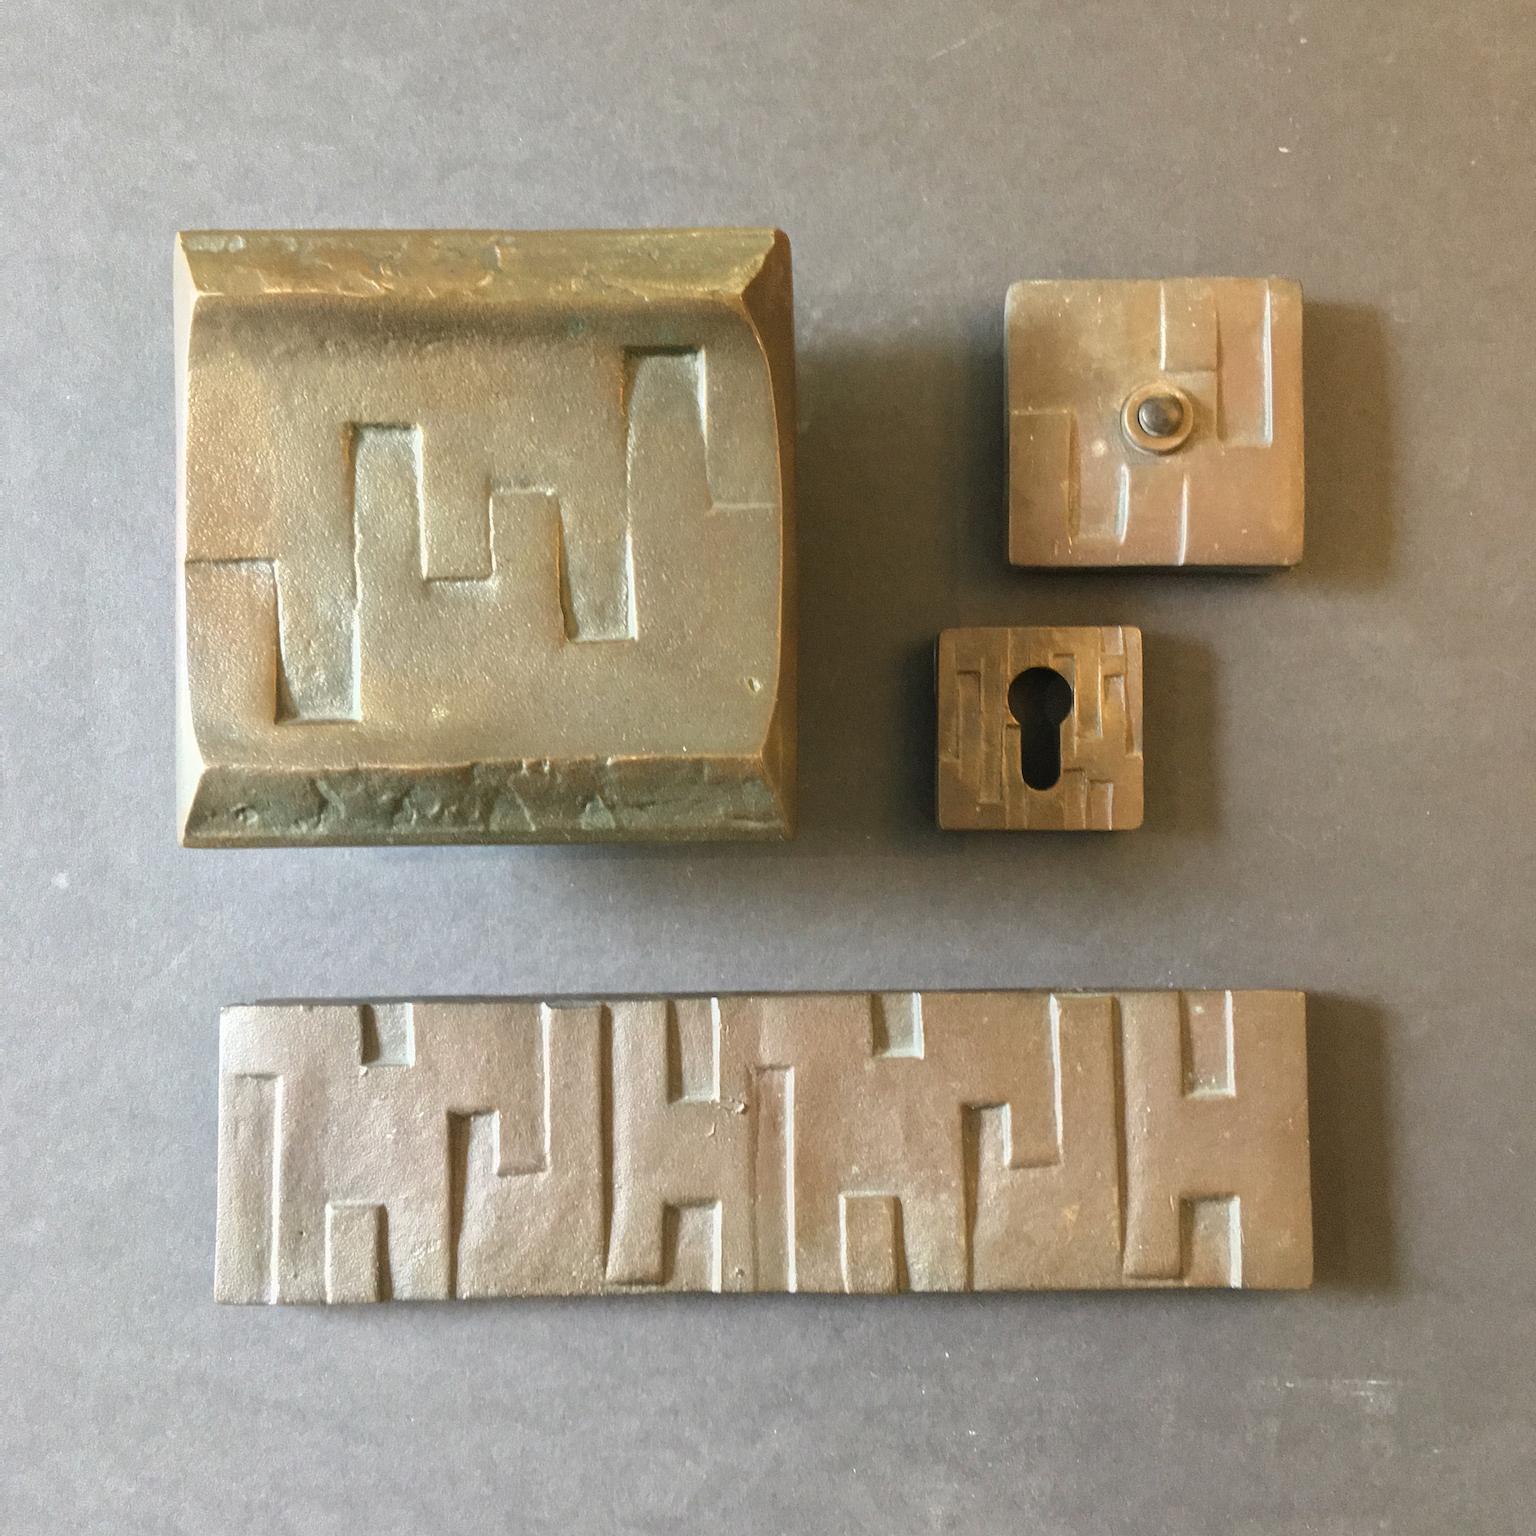 Brutalist bronze door handle and fittings with geometric design. The set includes a matching letterbox cover, bell push (not tested) and escutcheon or keyhole plate, European, mid-20th century.

The items in this set have been left as found,